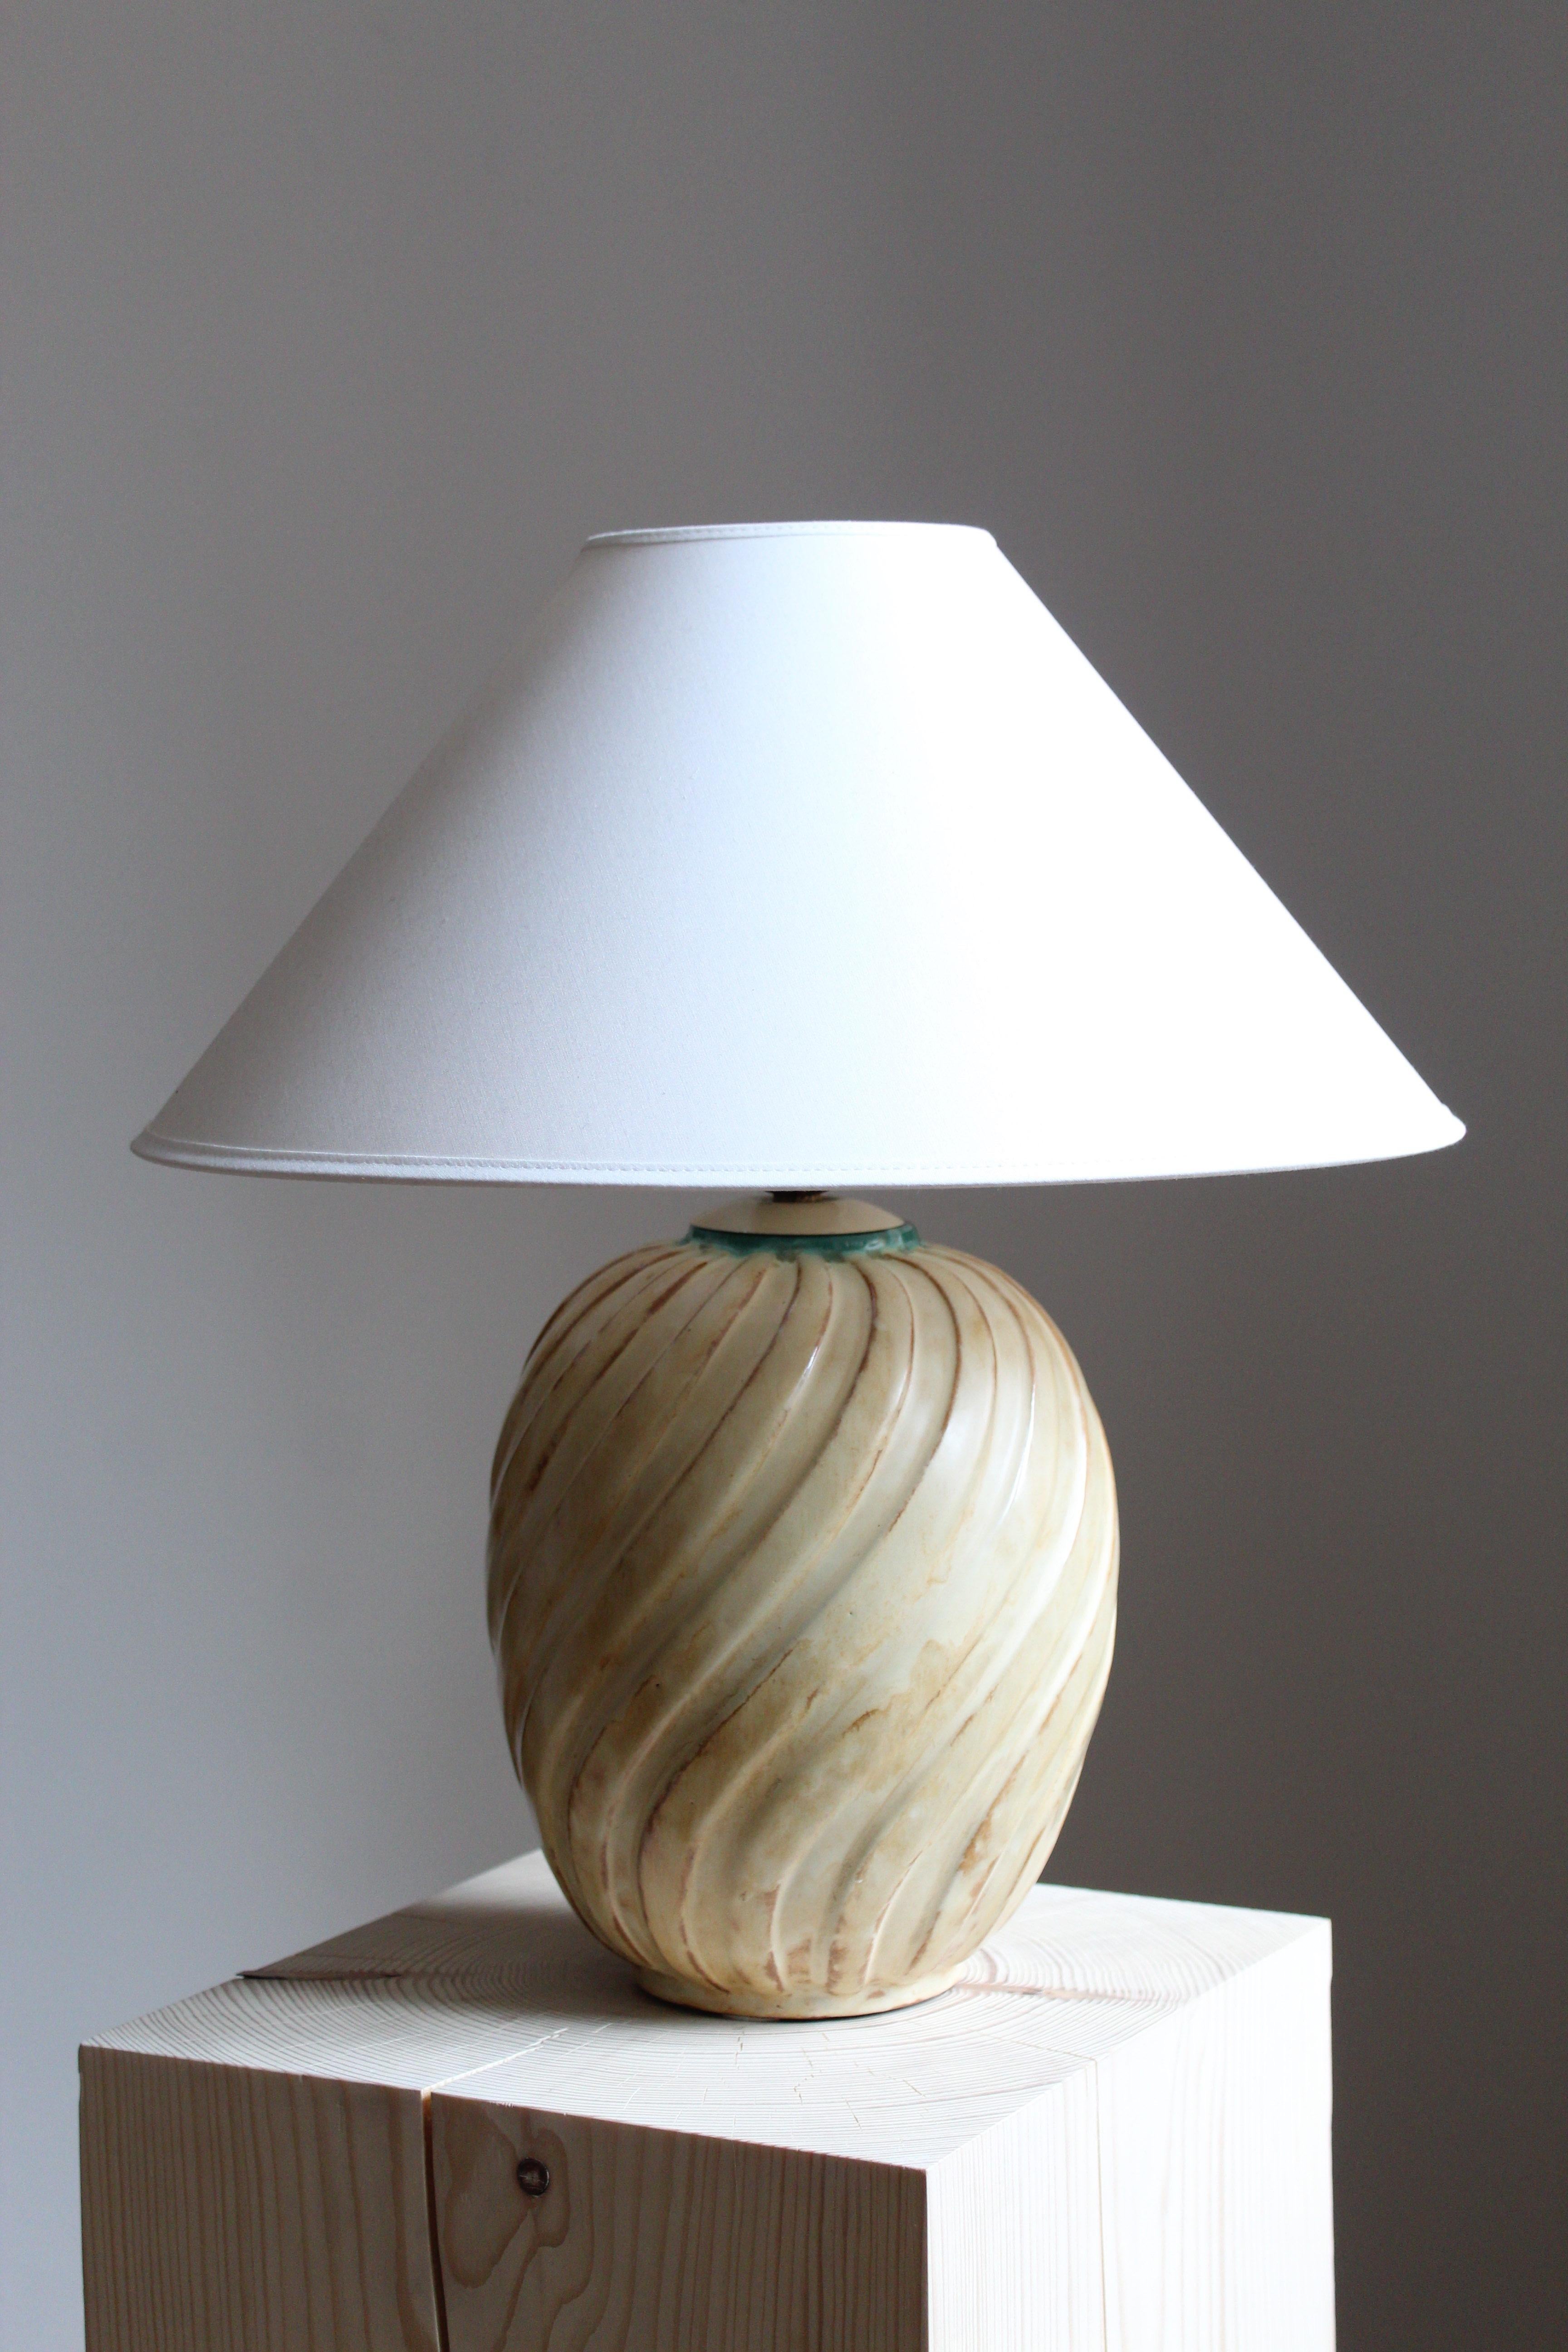 A sizable table lamp by iconic Swedish ceramic firm Ekeby. In glazed stoneware. Marked.

Sold without lampshade, stated dimensions excluding lampshade.

Glaze features brown-beige colors.

Other designers of the period include Axel Salto, Carl Harry